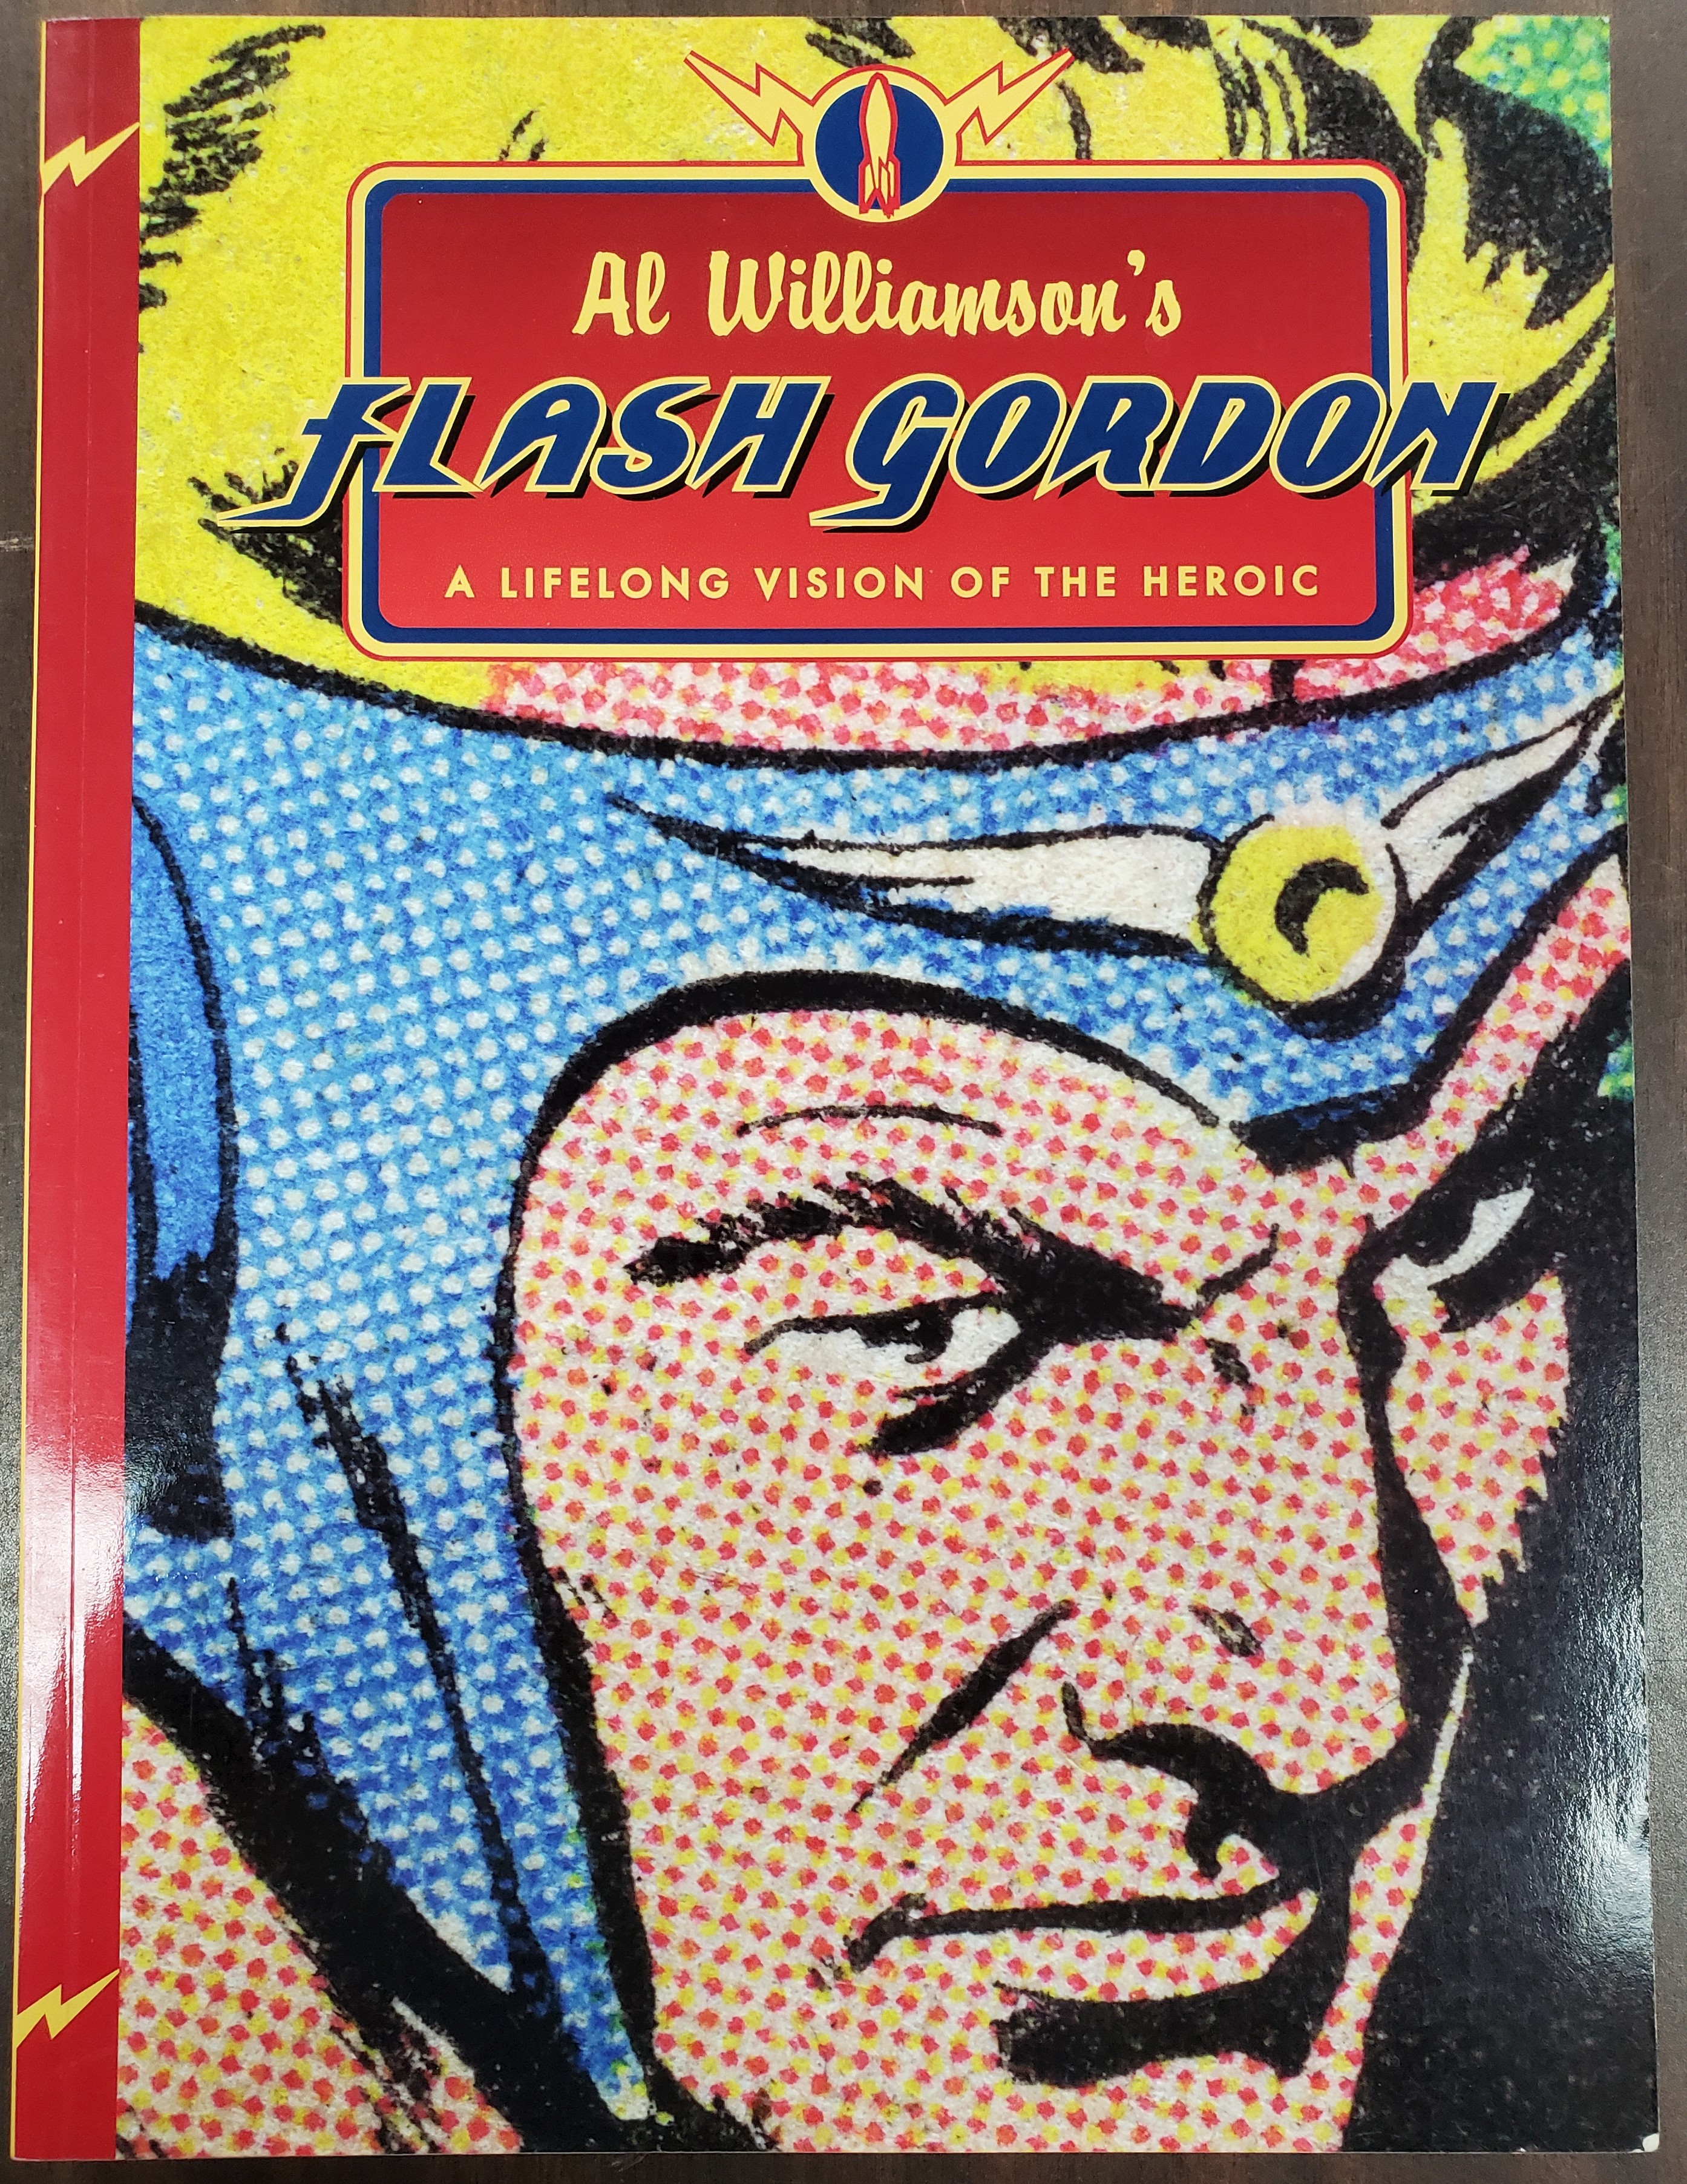 Al Williamson's Flash Gordon A Lifelong Vision of The Heroic Softcover Used - Like New